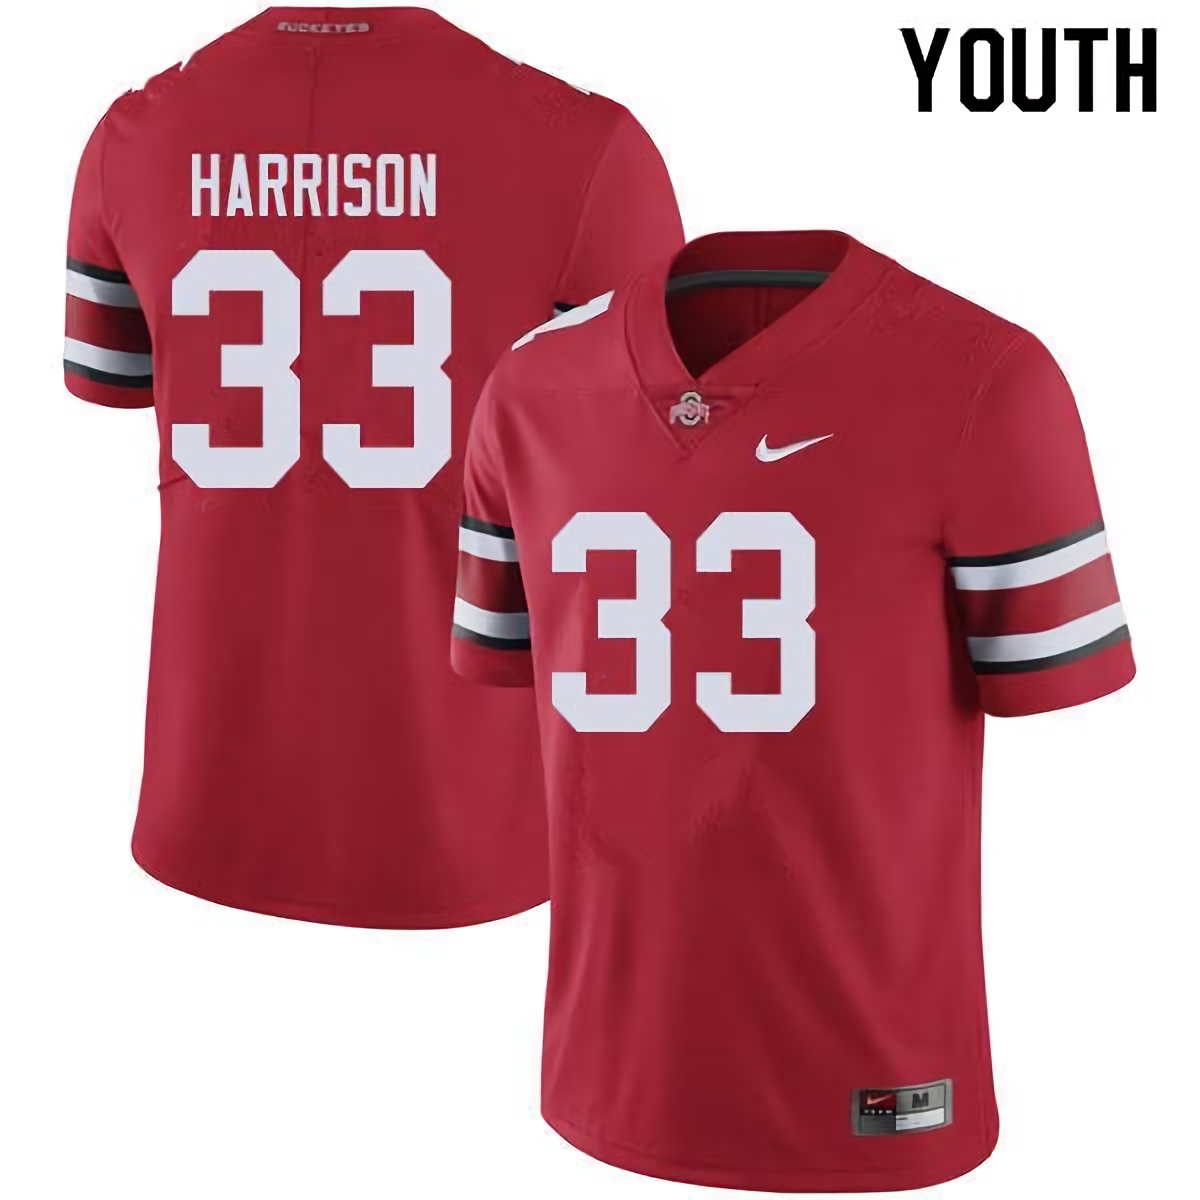 Zach Harrison Ohio State Buckeyes Youth NCAA #33 Nike Red College Stitched Football Jersey YSP5556HA